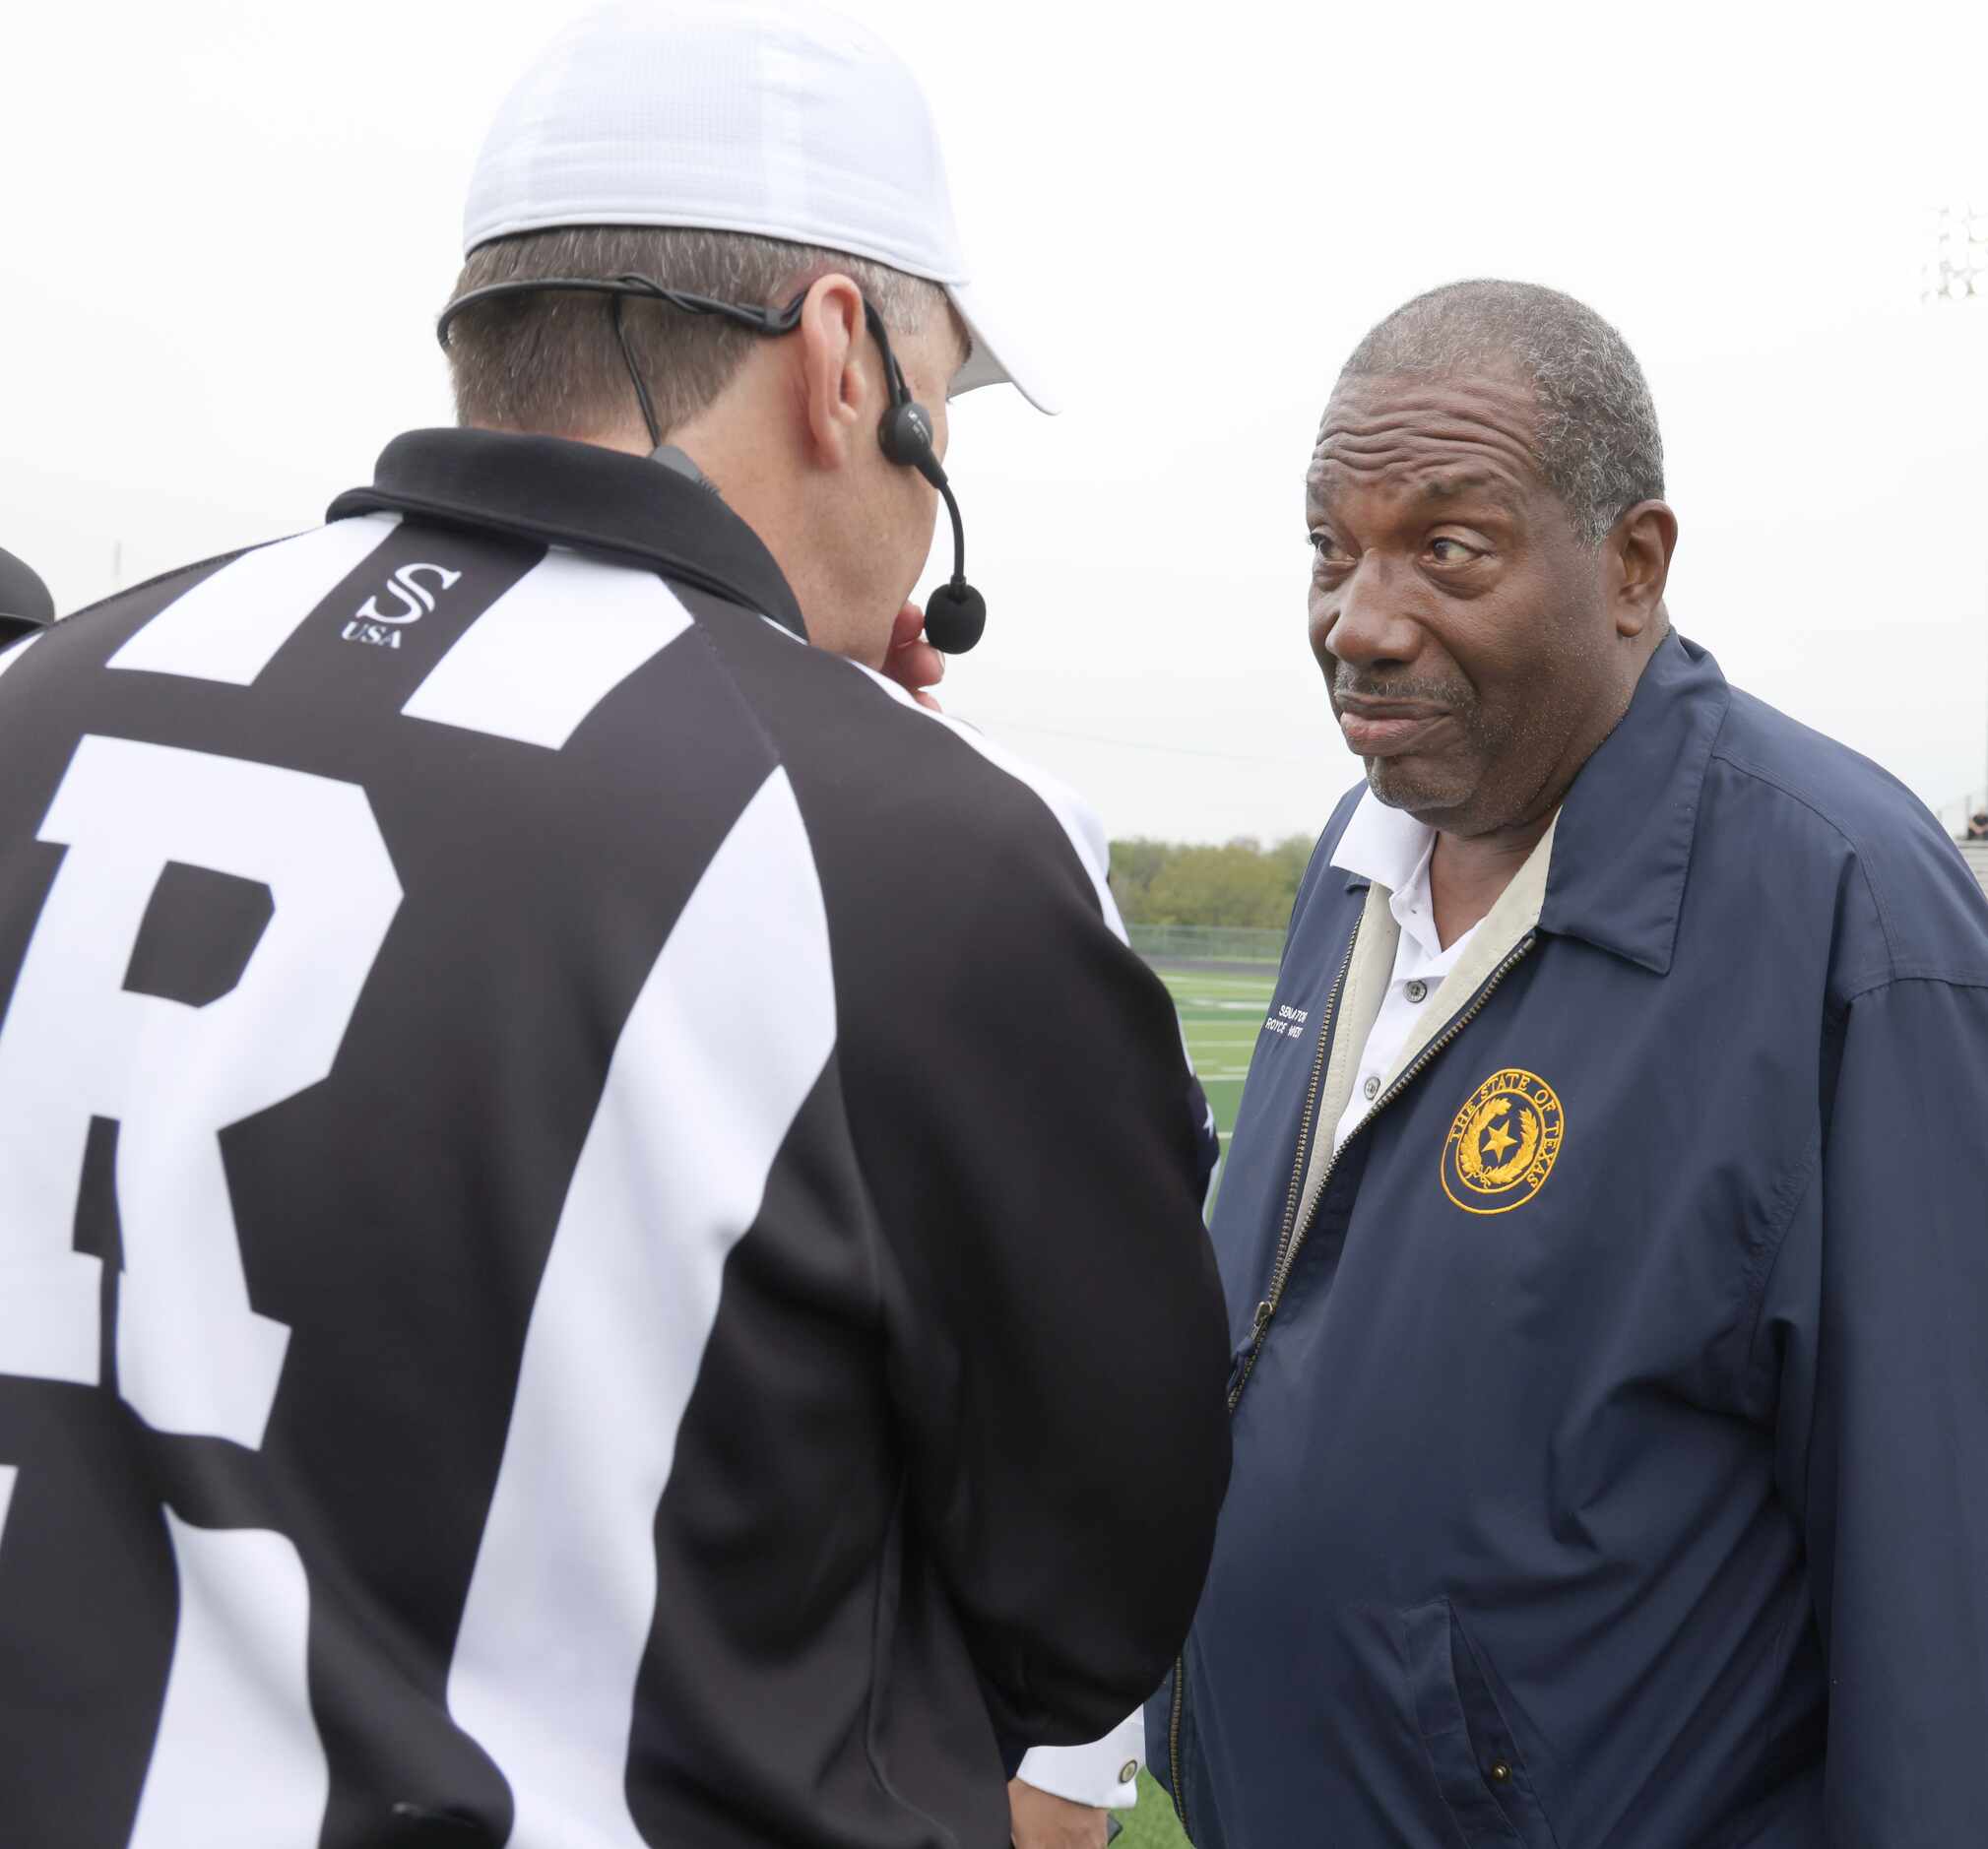 Texas State Senator Royce West, right, speaks with a game official before flipping the coin...